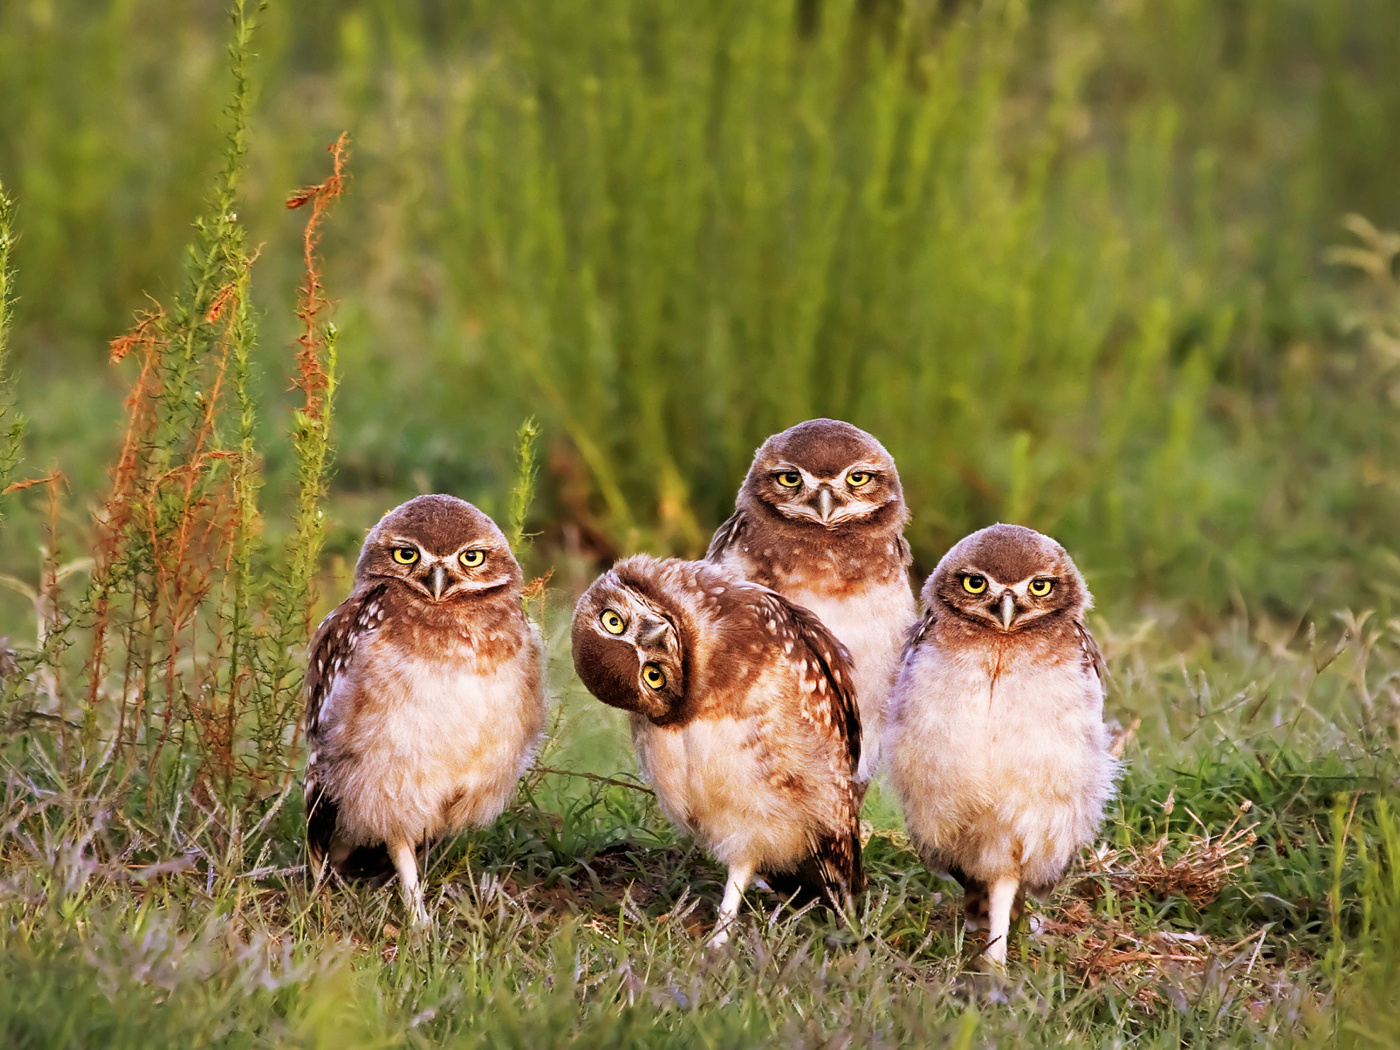 Morning with owls wallpaper 1400x1050